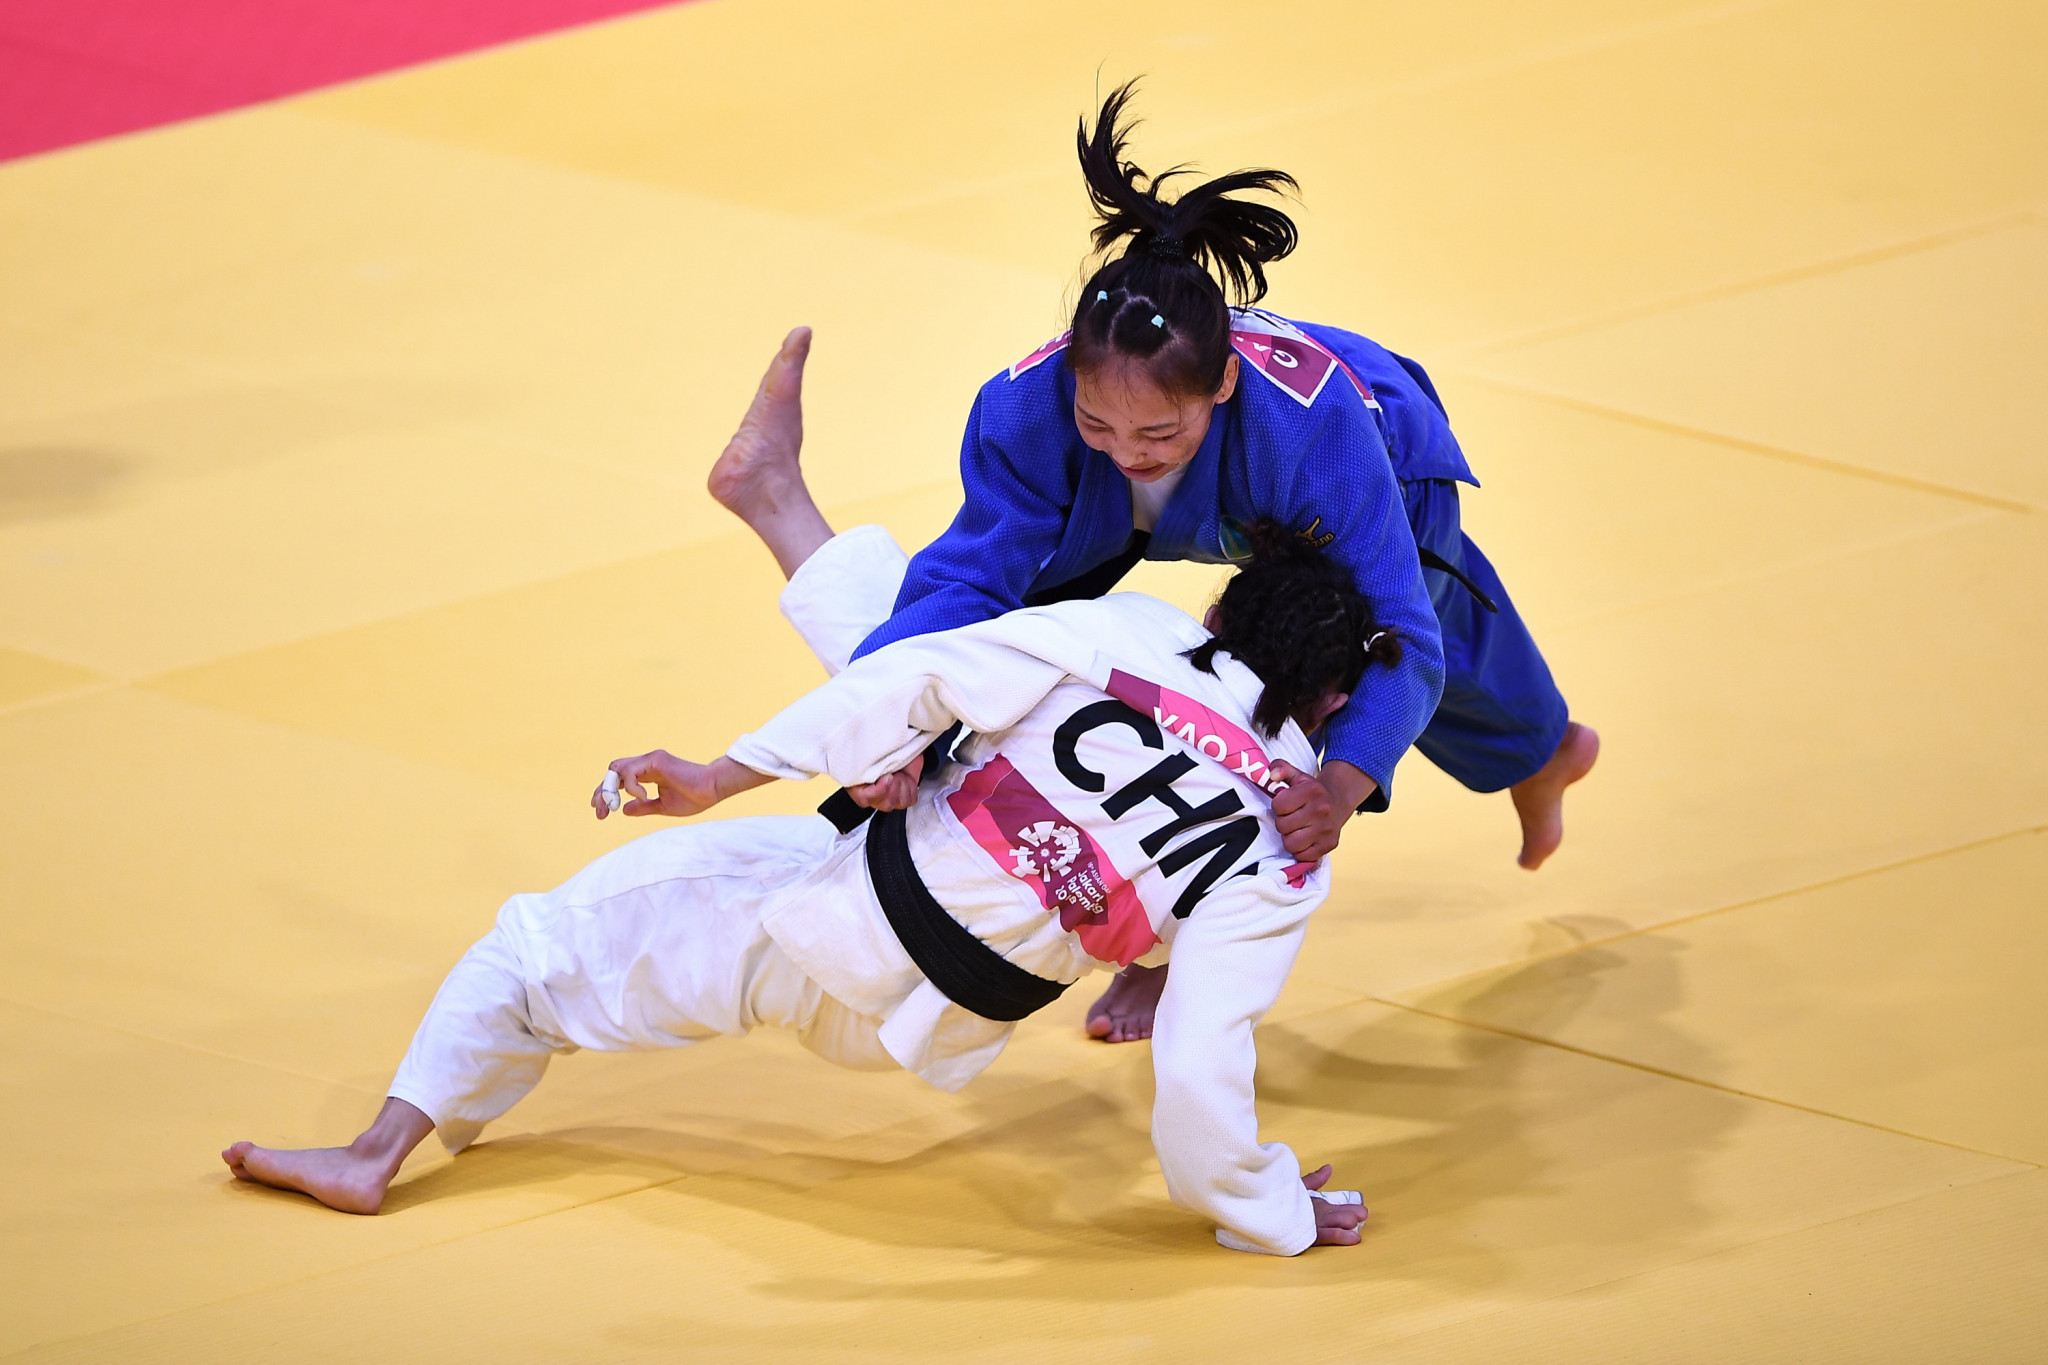 Olympic qualification points on offer as IJF Grand Prix heads to Tashkent